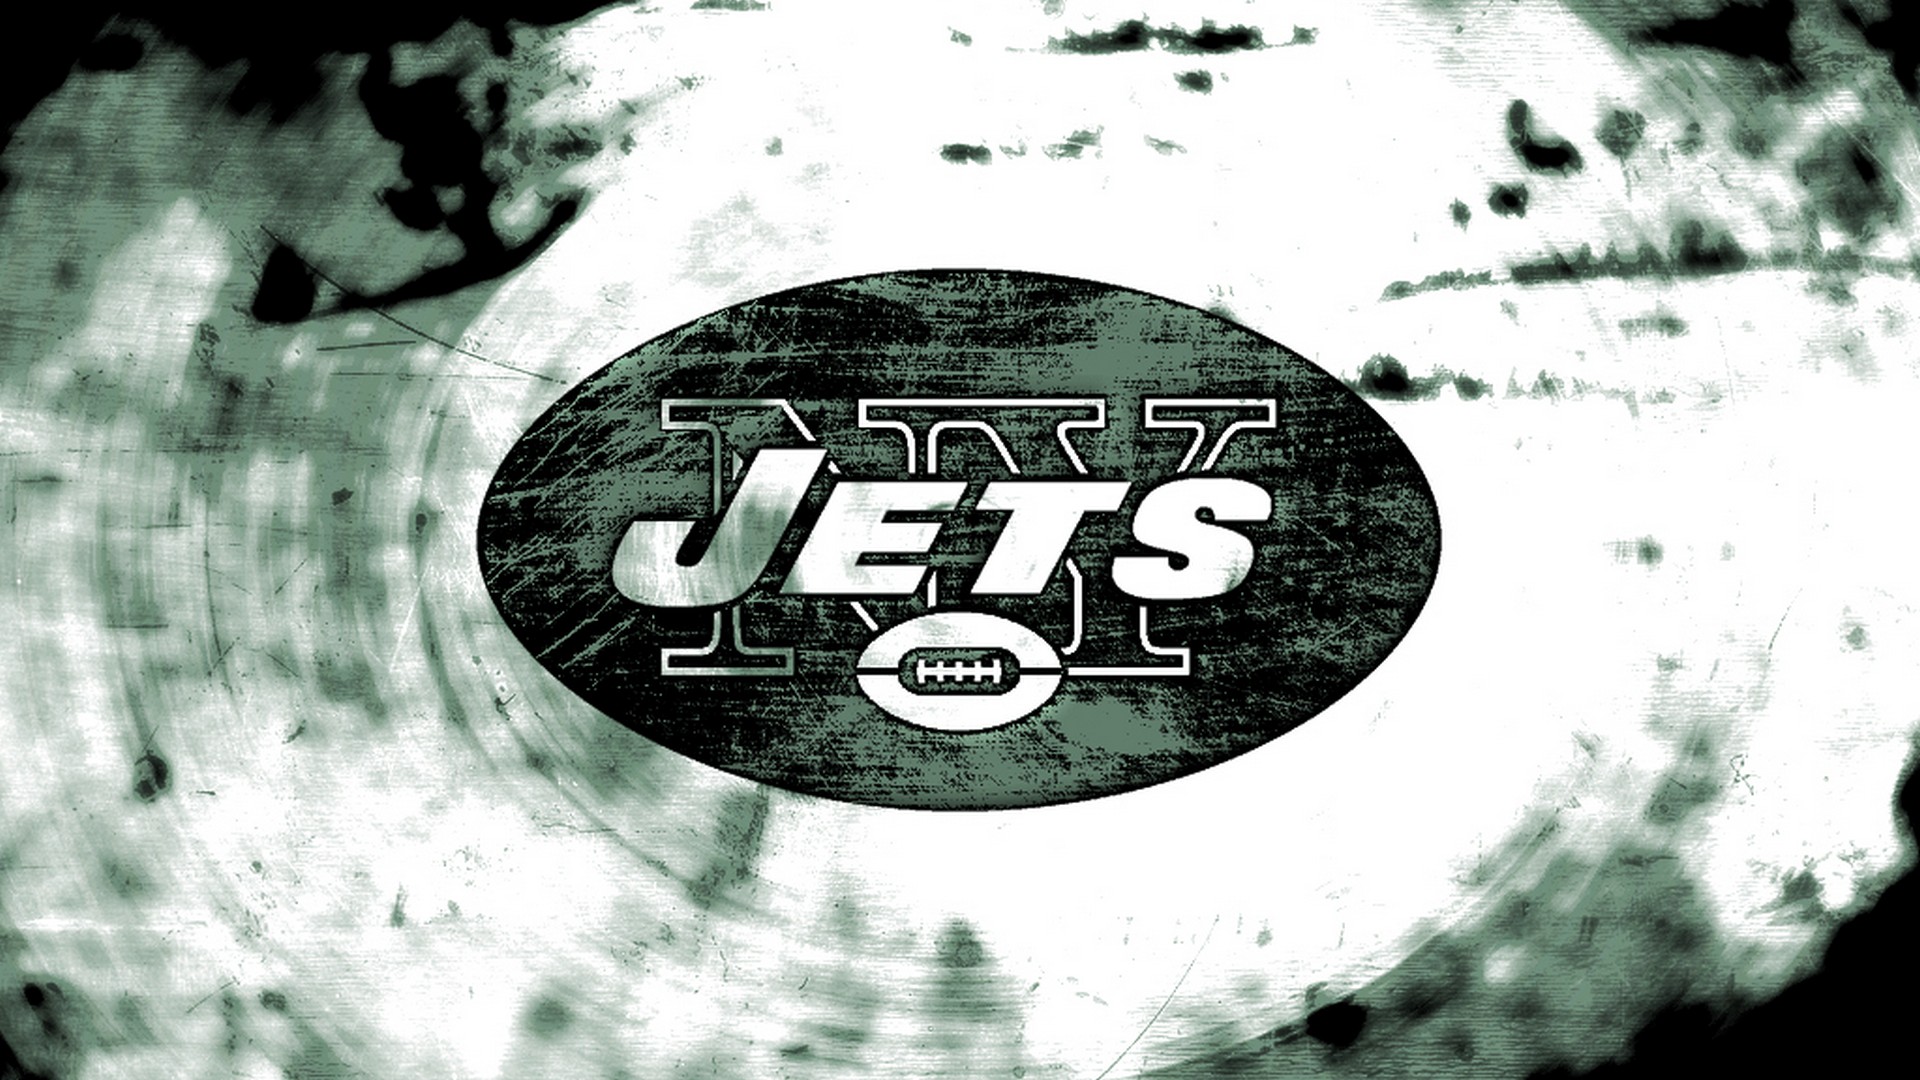 New York Jets HD Wallpapers With Resolution 1920X1080 pixel. You can make this wallpaper for your Mac or Windows Desktop Background, iPhone, Android or Tablet and another Smartphone device for free